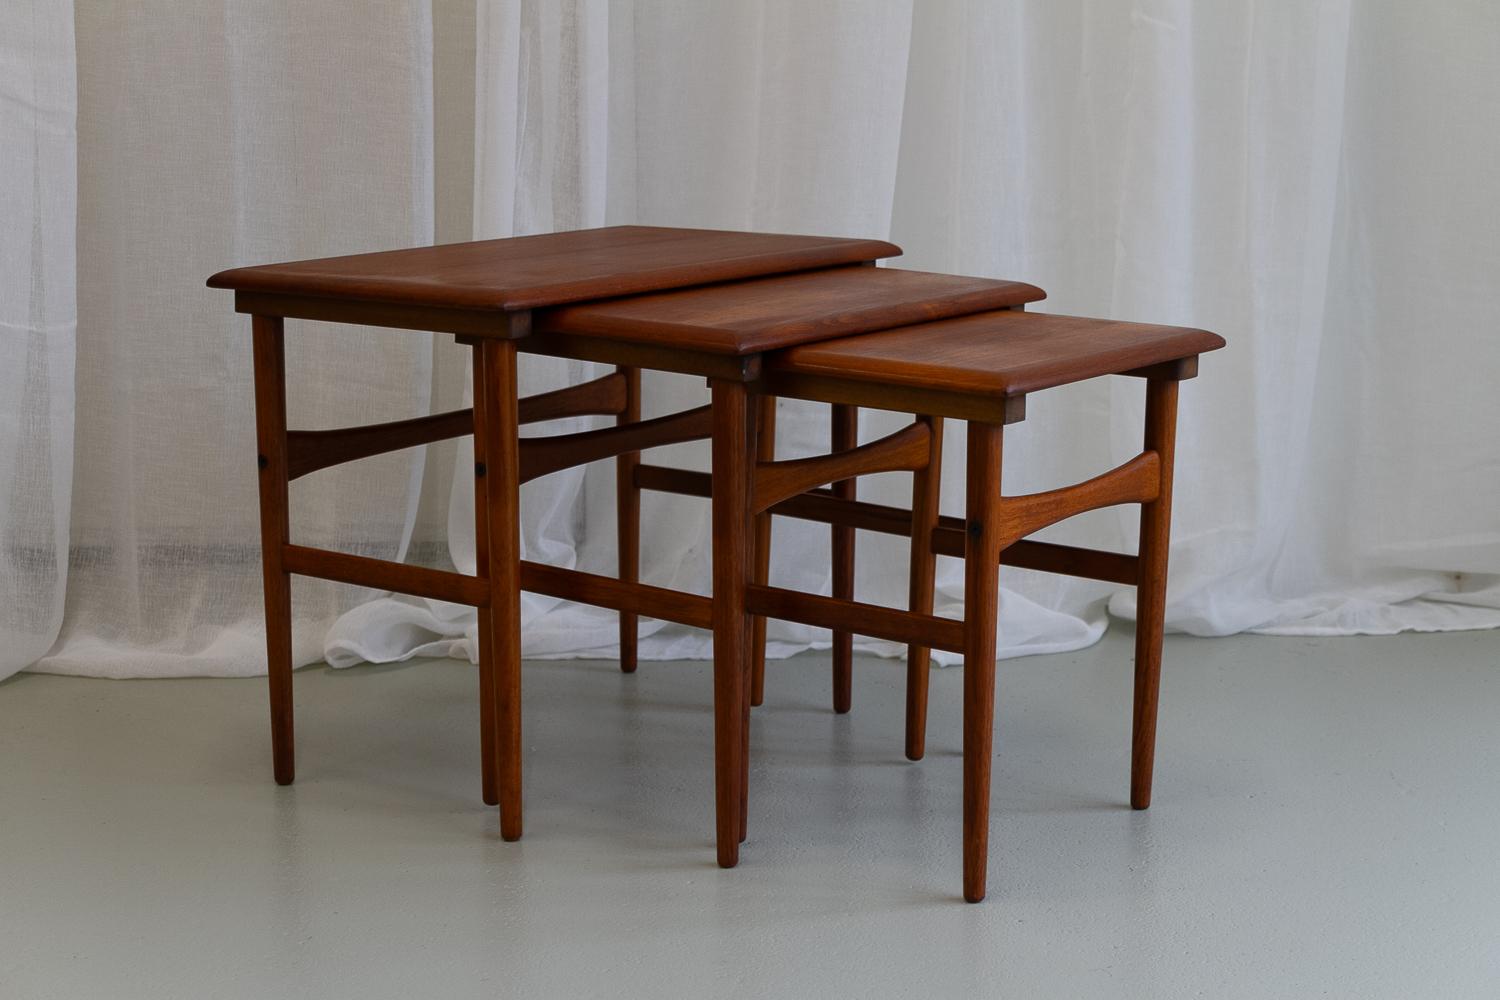 Danish Modern Teak Nesting Tables 1960s. Set of 3.

Set of elegant Danish nesting tables. Thin round tapered legs and shaped crossbars. Wide slanting edge in solid teak. Very versatile, can be used together or as individual side tables for lamps,